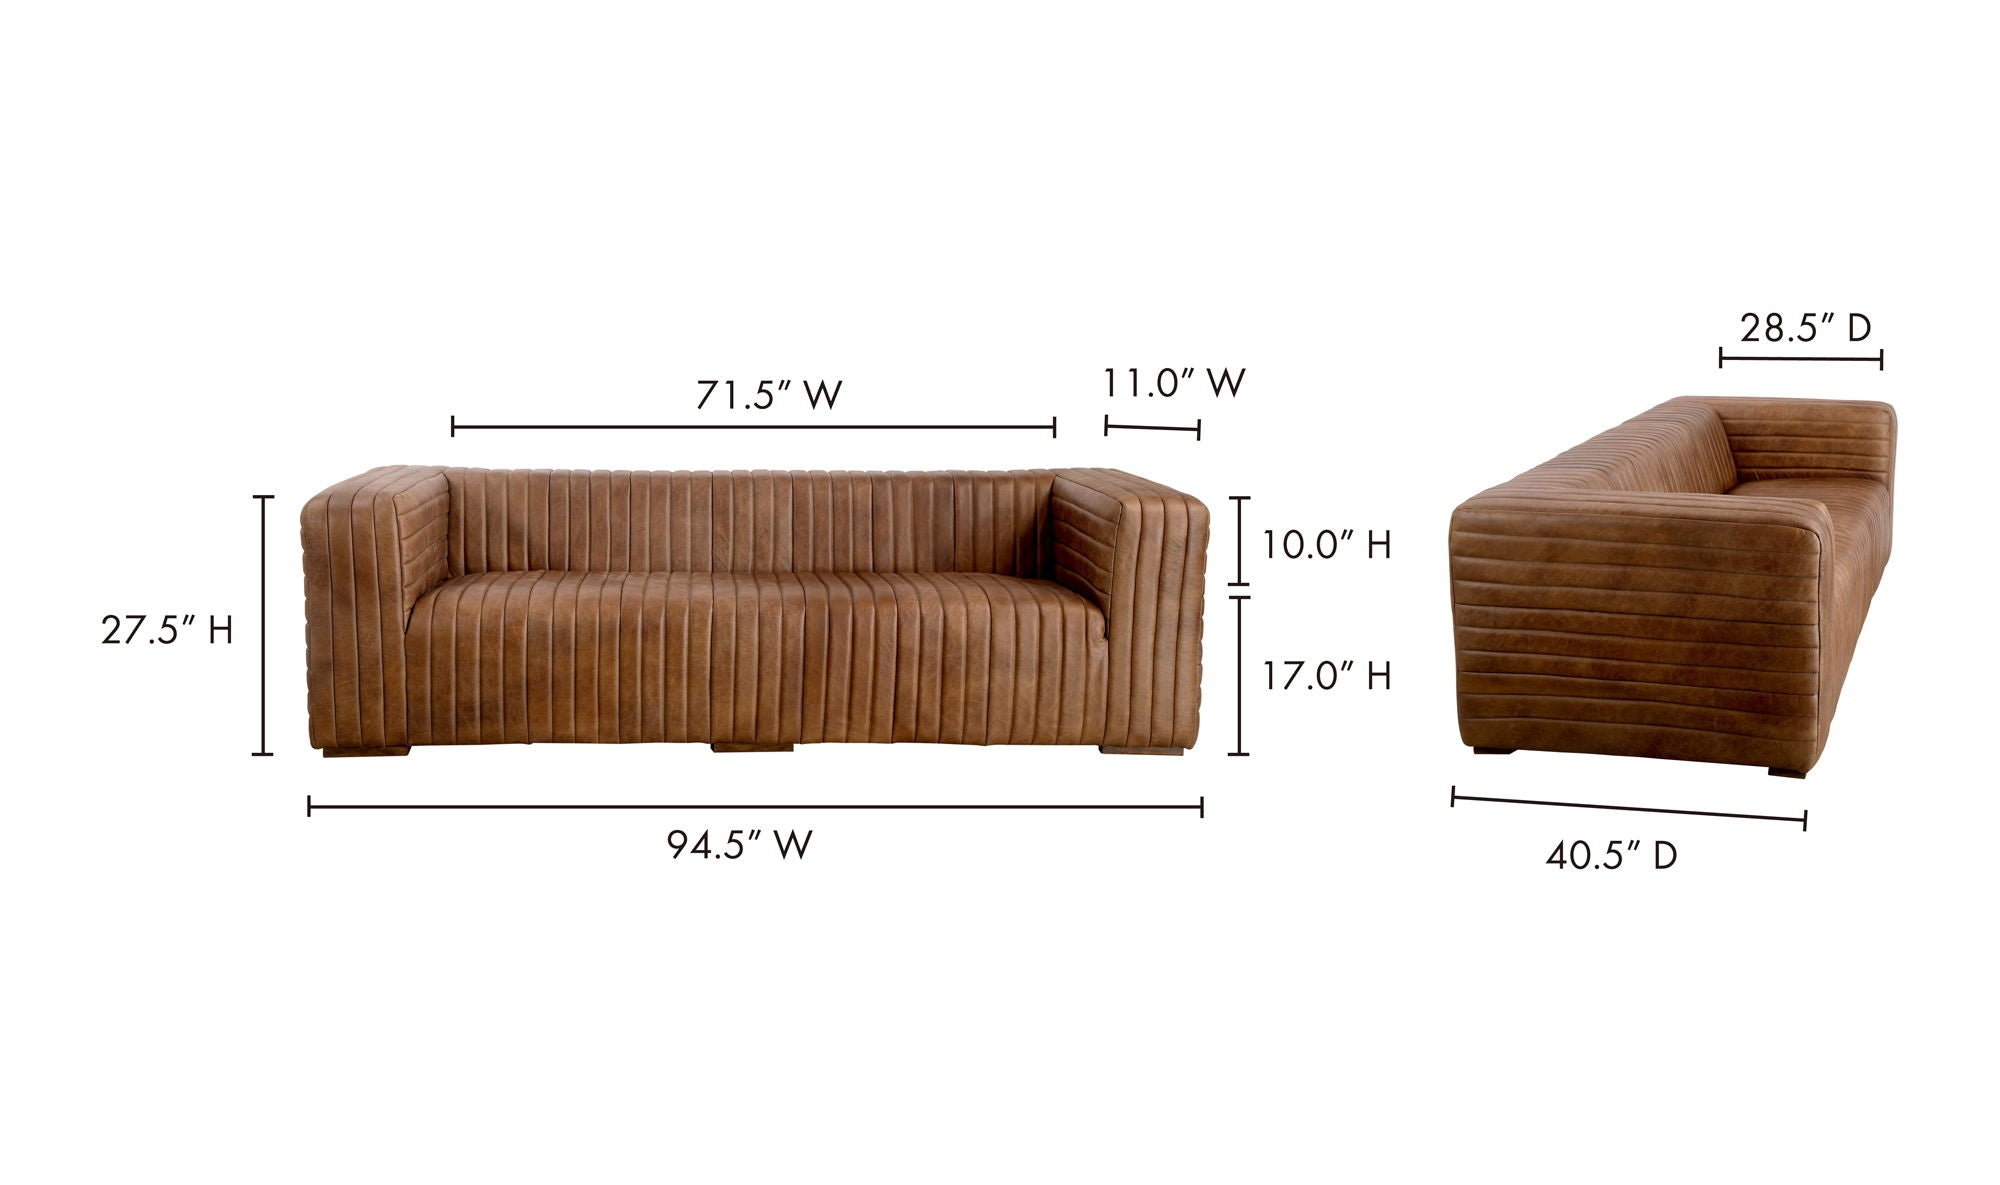 Castle Sofa - Light Brown Top-Grain Leather - Channel-Stitched Design - Stylish Living Room Furniture